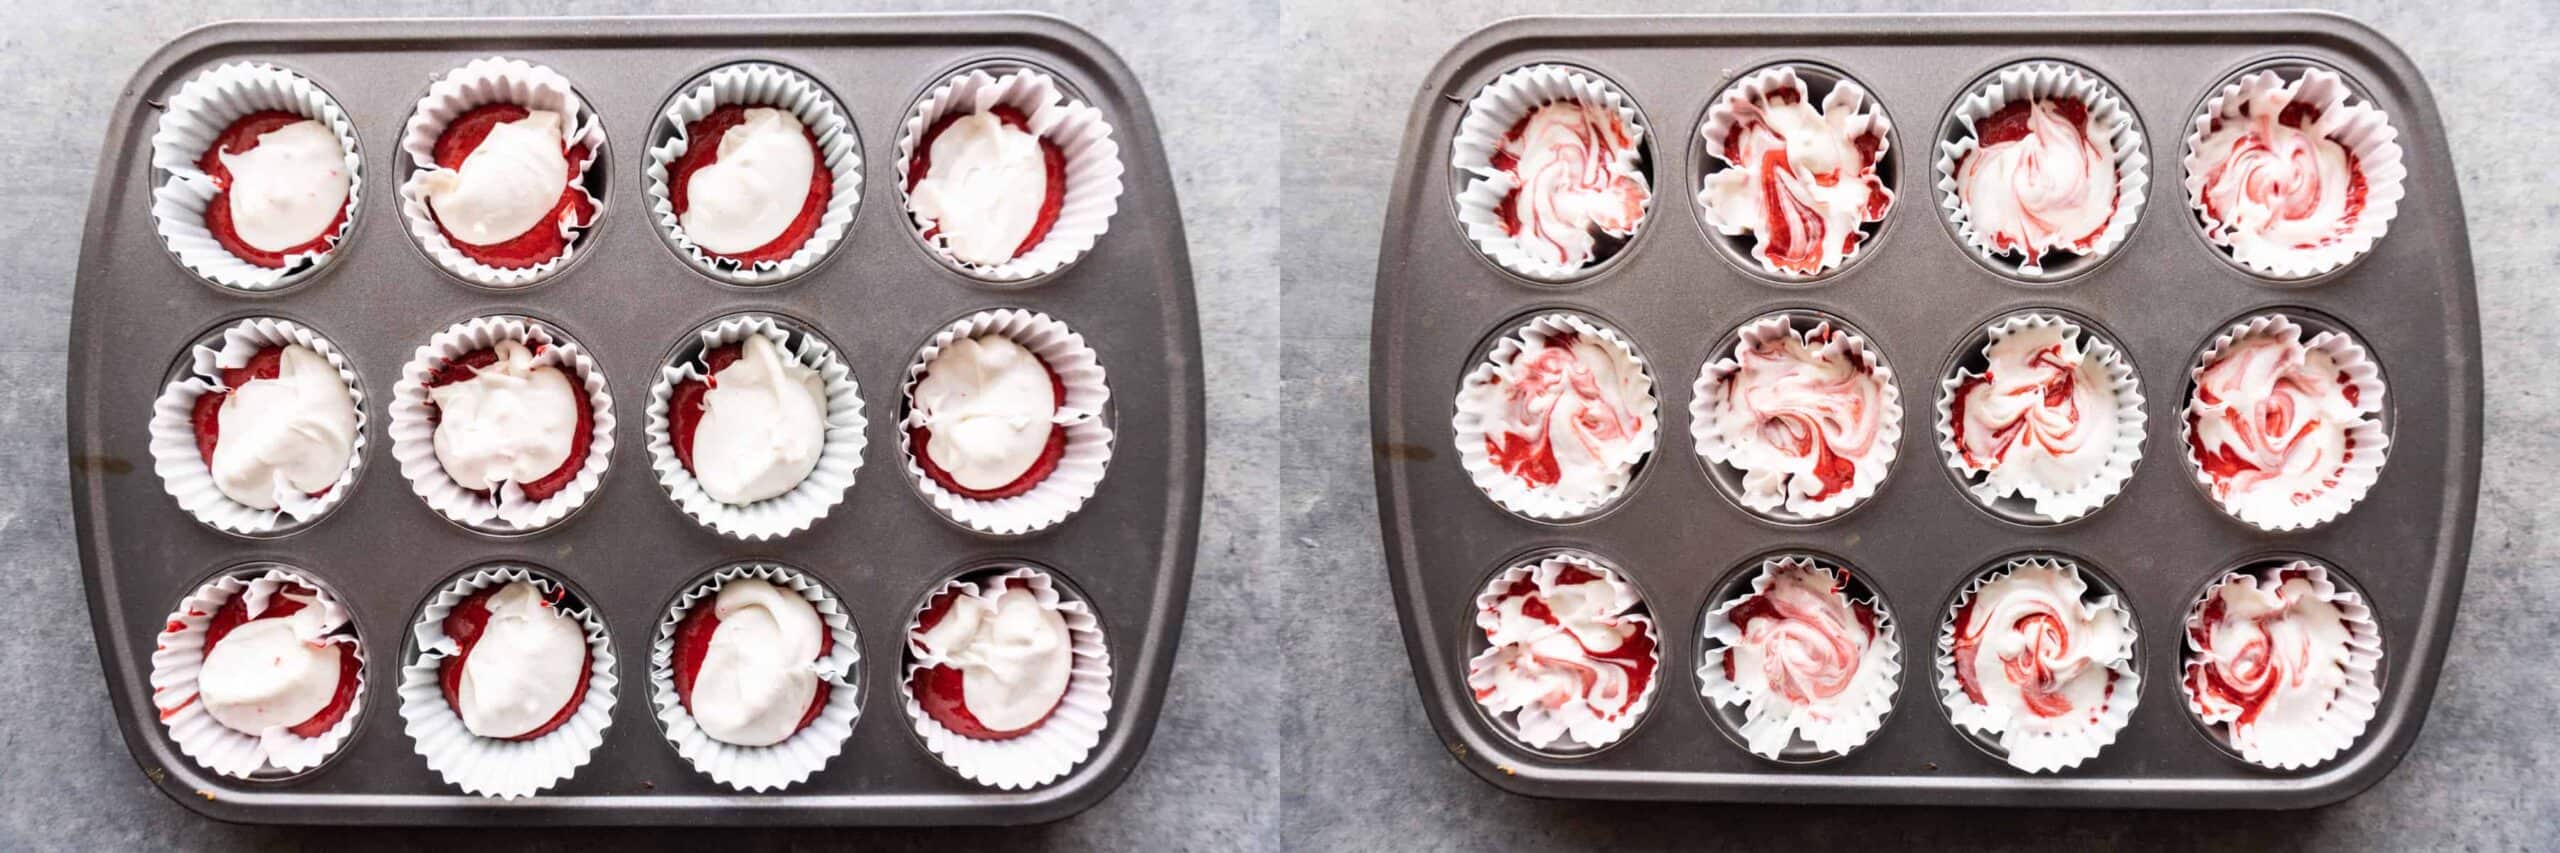 before and after swirling cupcake batter